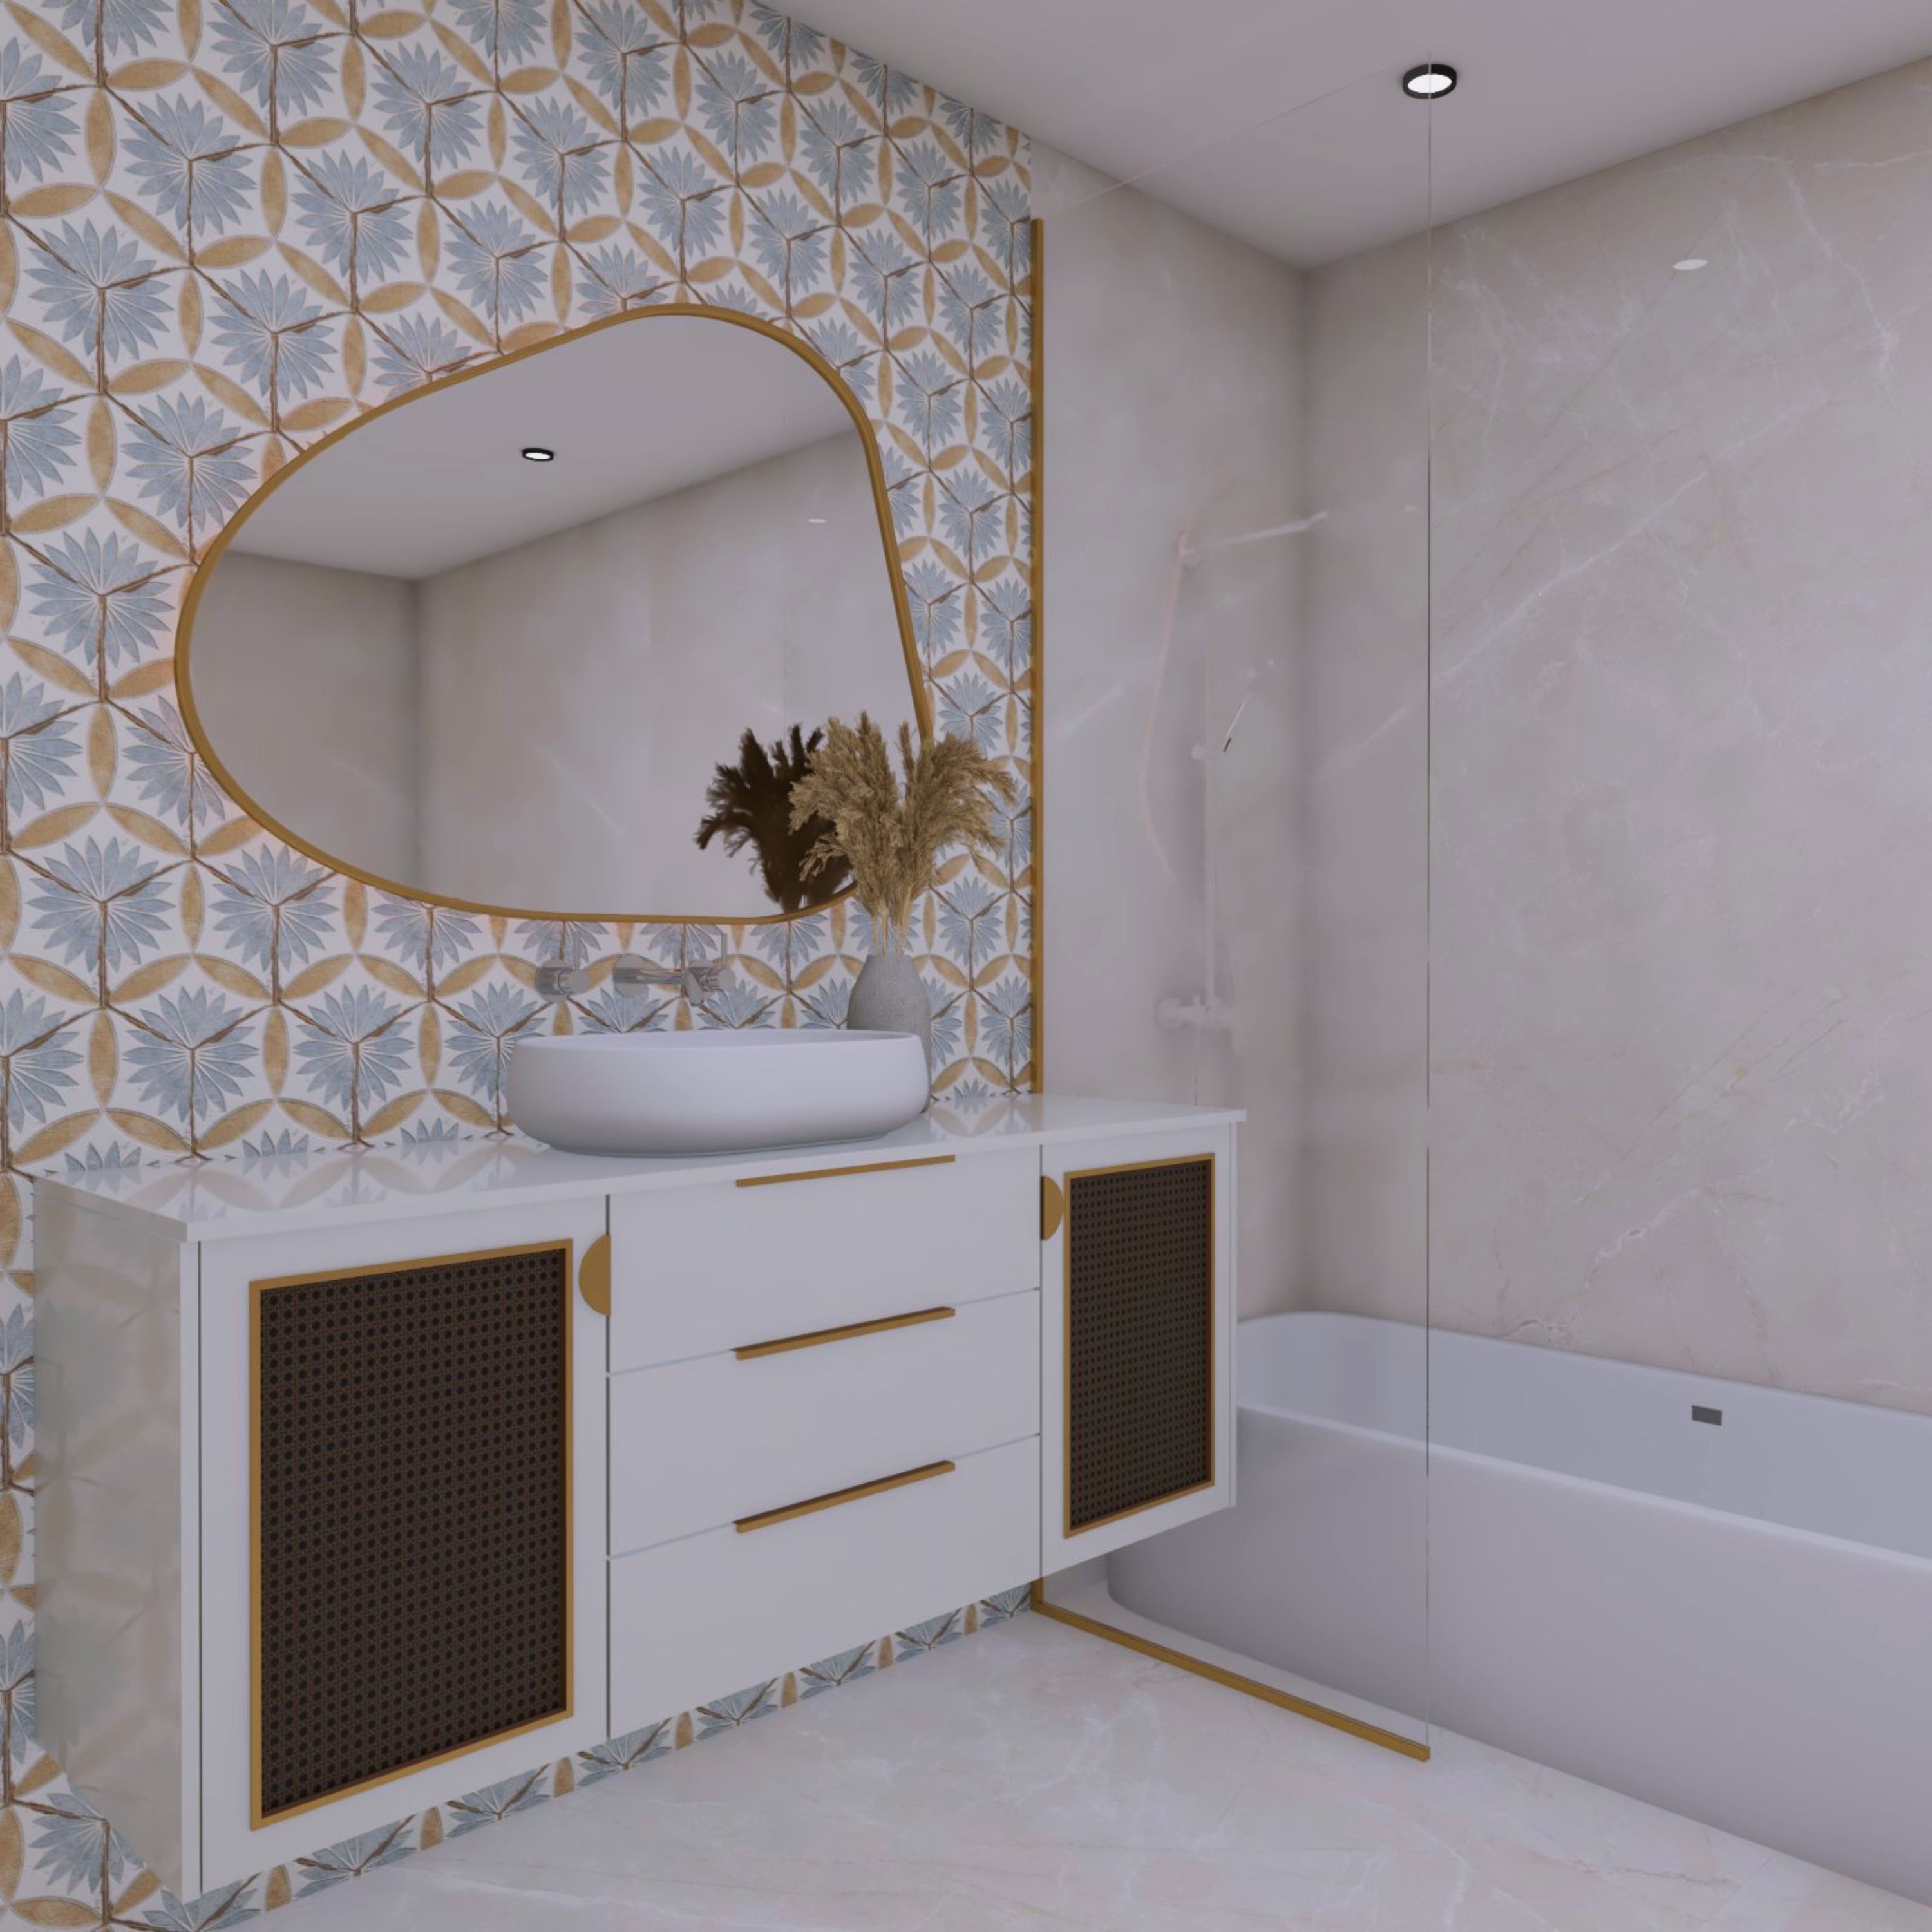 Transitional Bathroom Design With Multicoloured Wall Tiles And Large Wall-Mounted Vanity Unit